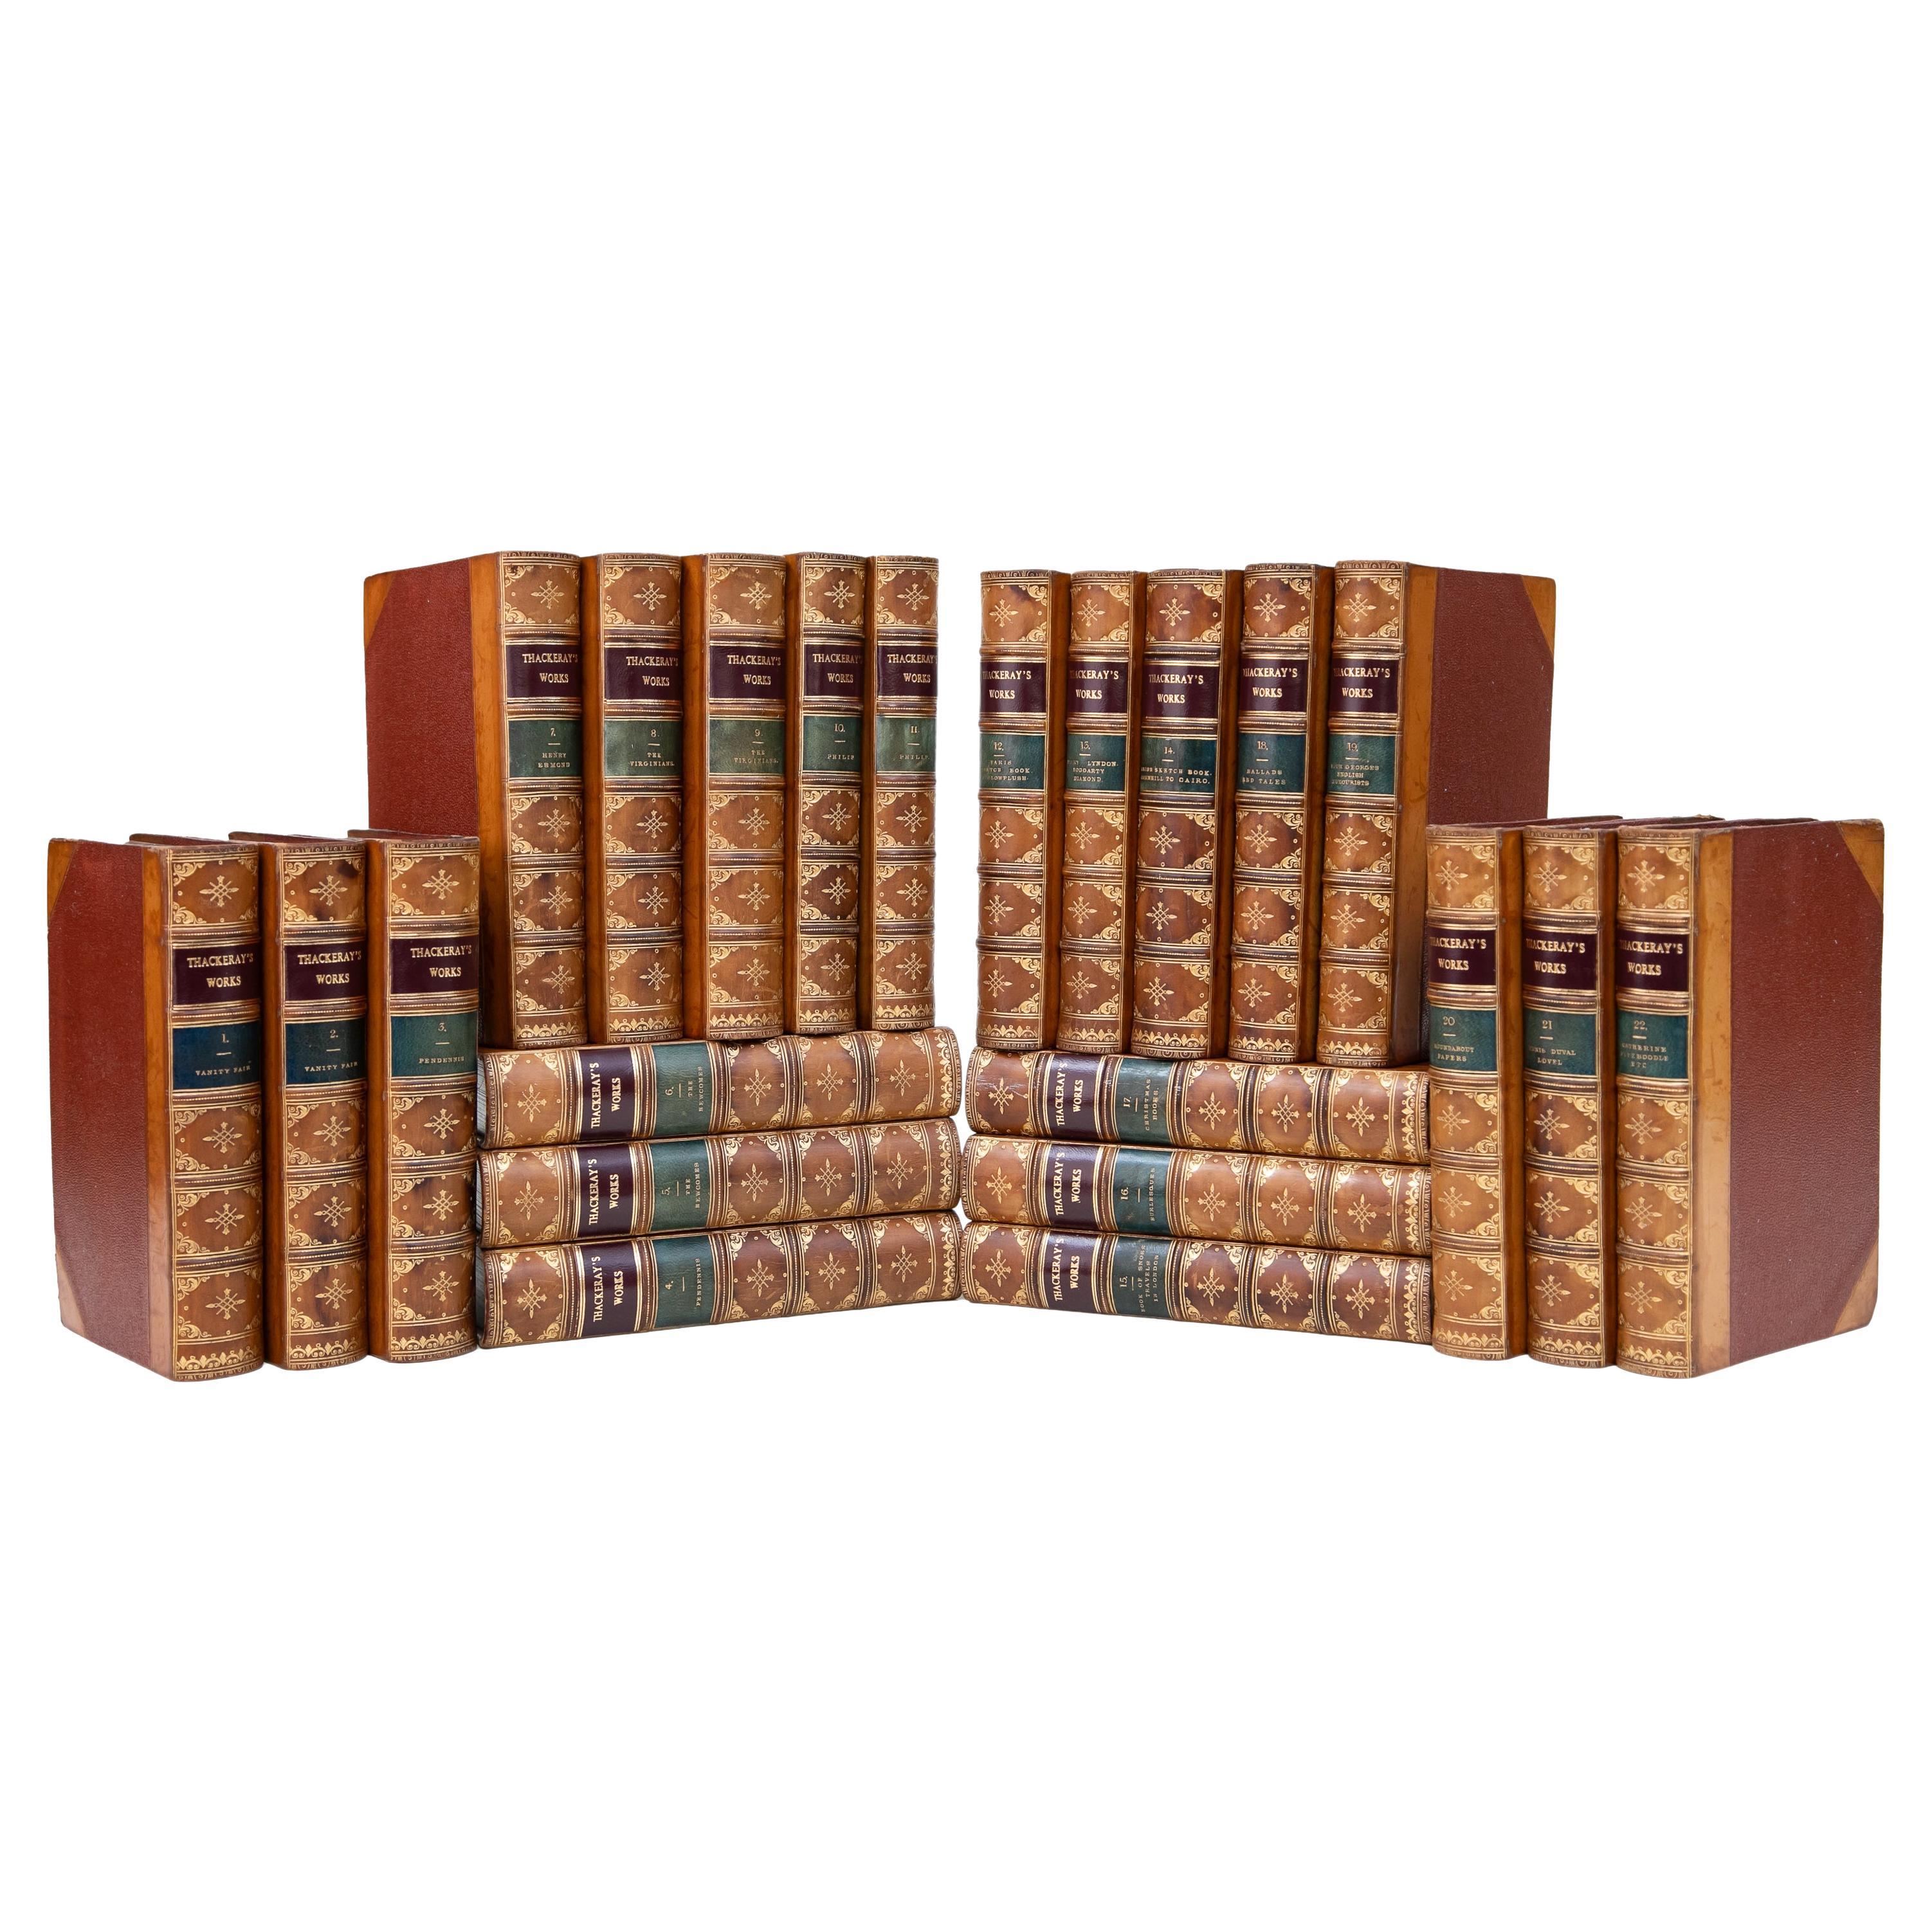 22 Volumes. William Makepeace Thackeray, The Works.